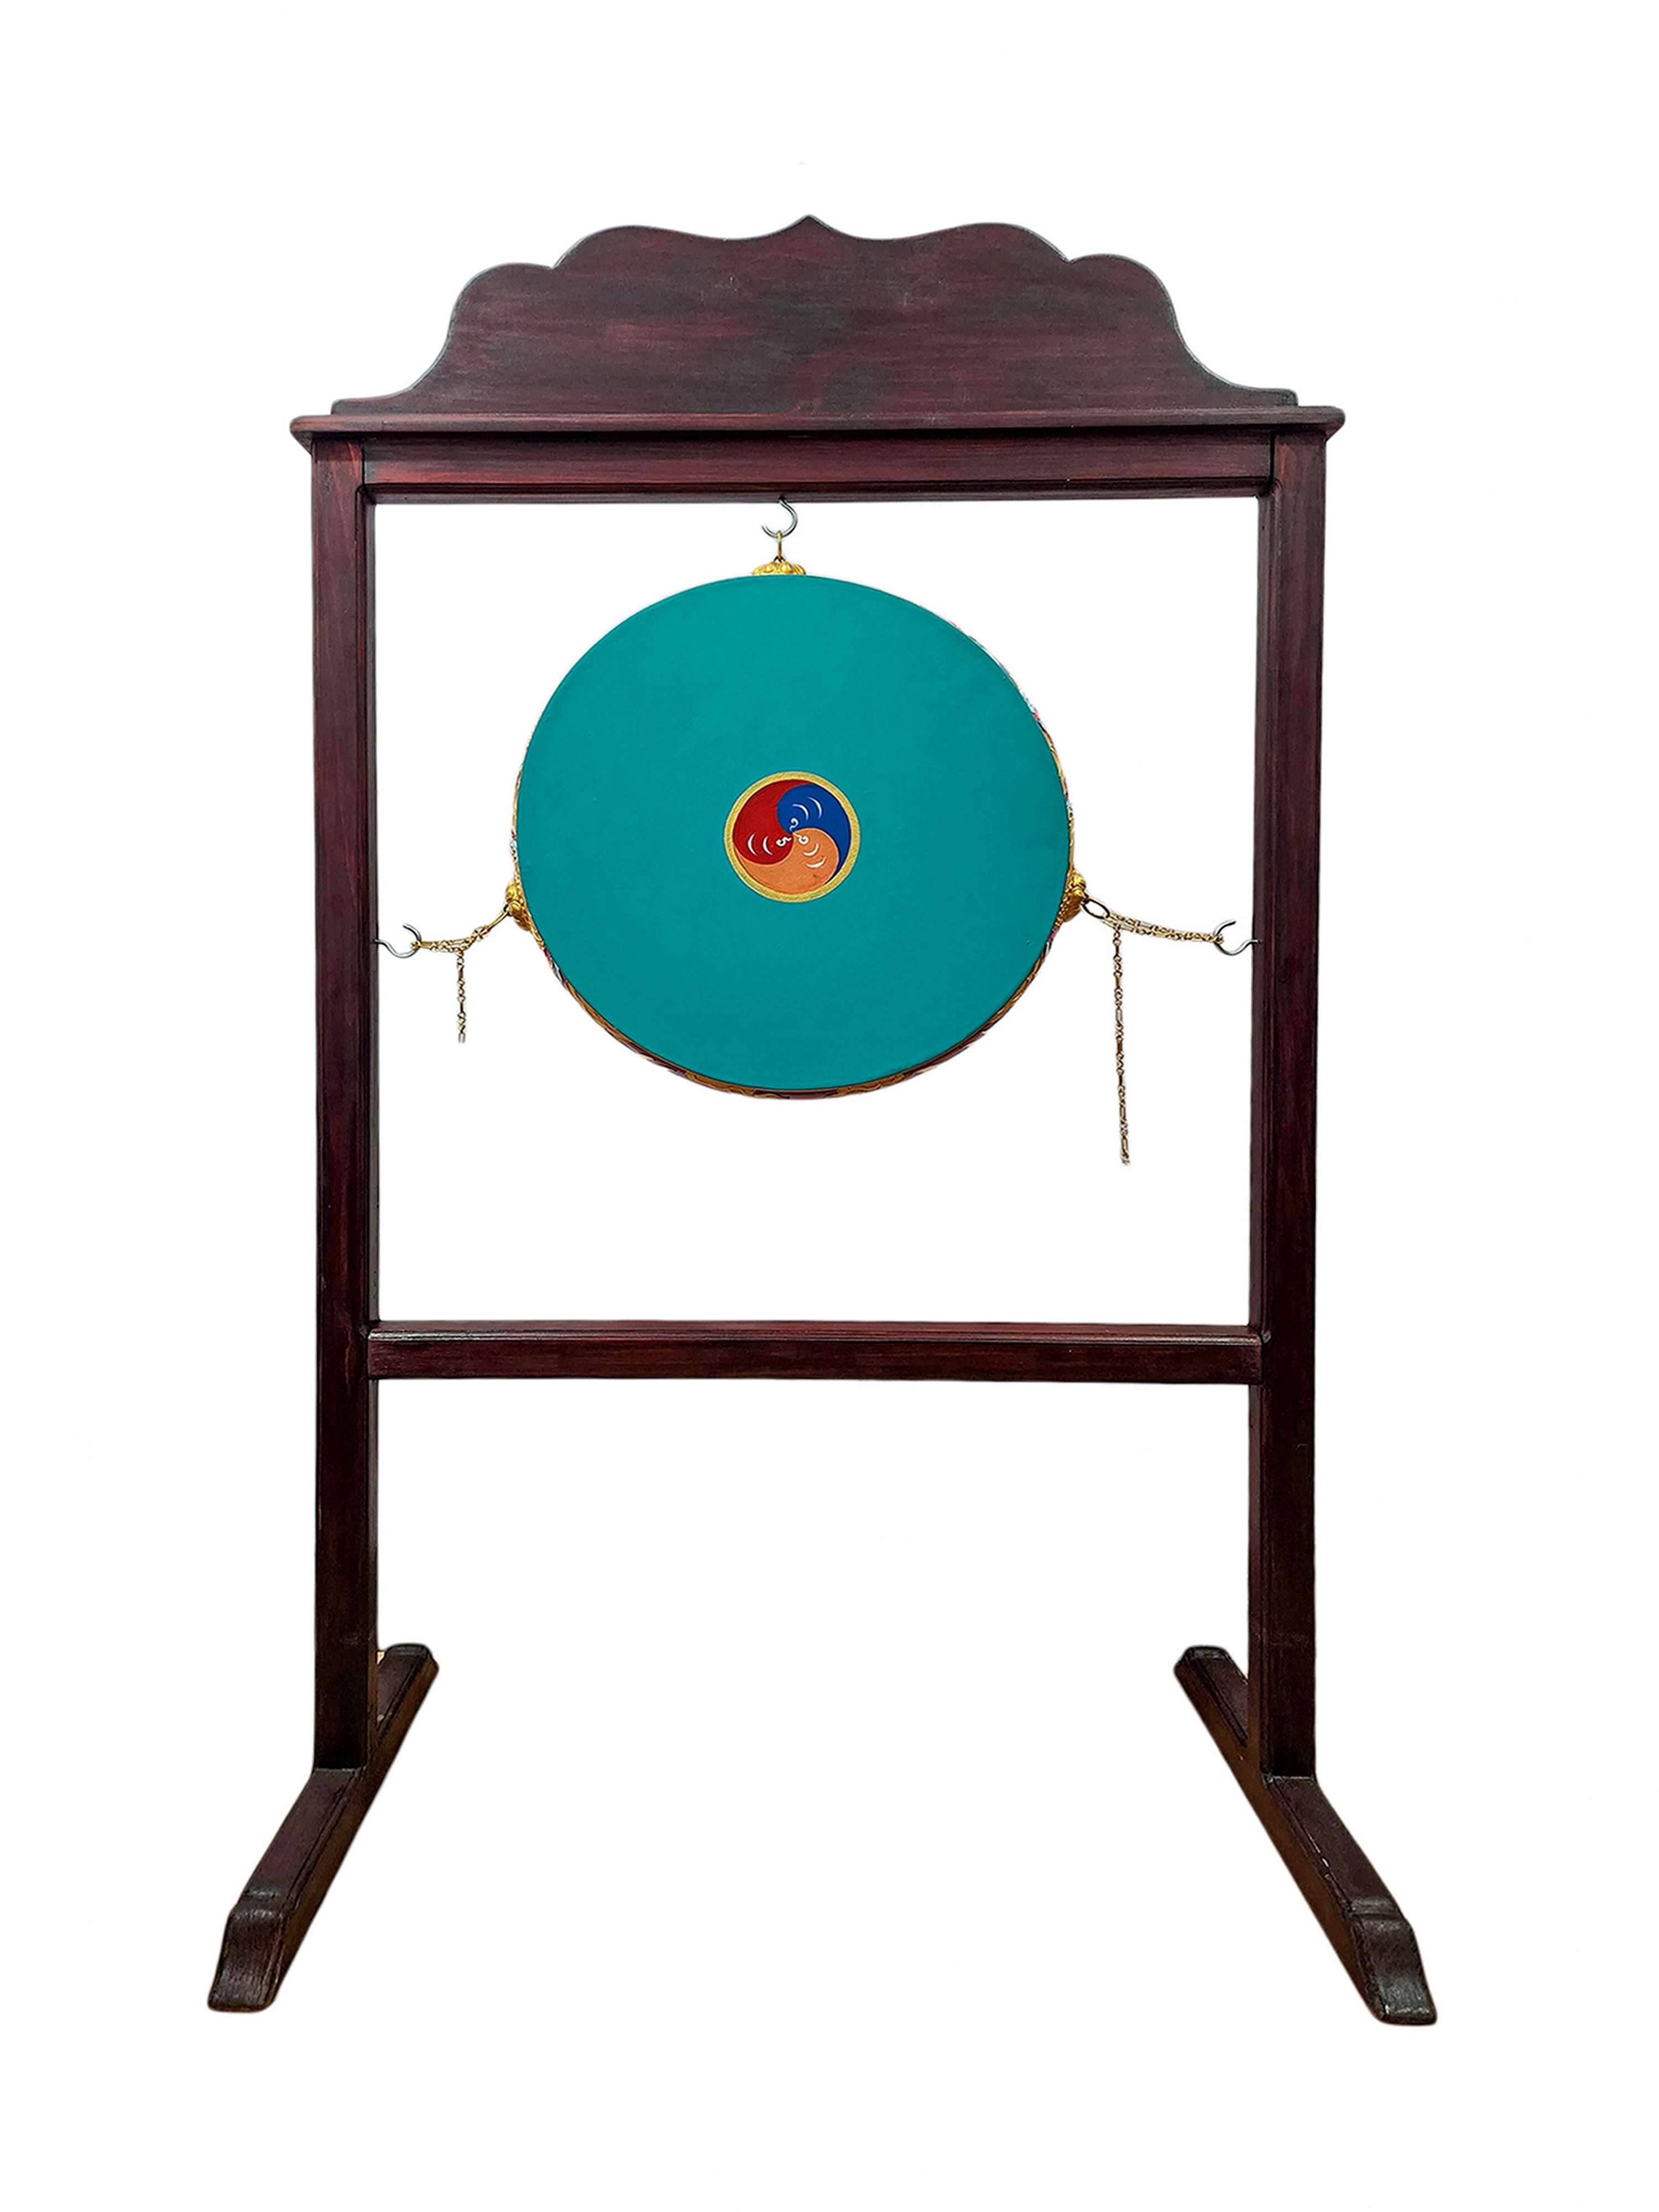 High-quality Tibetan Monastery Drum With Wooden Stand dhyangro - Traditional Painted Colors